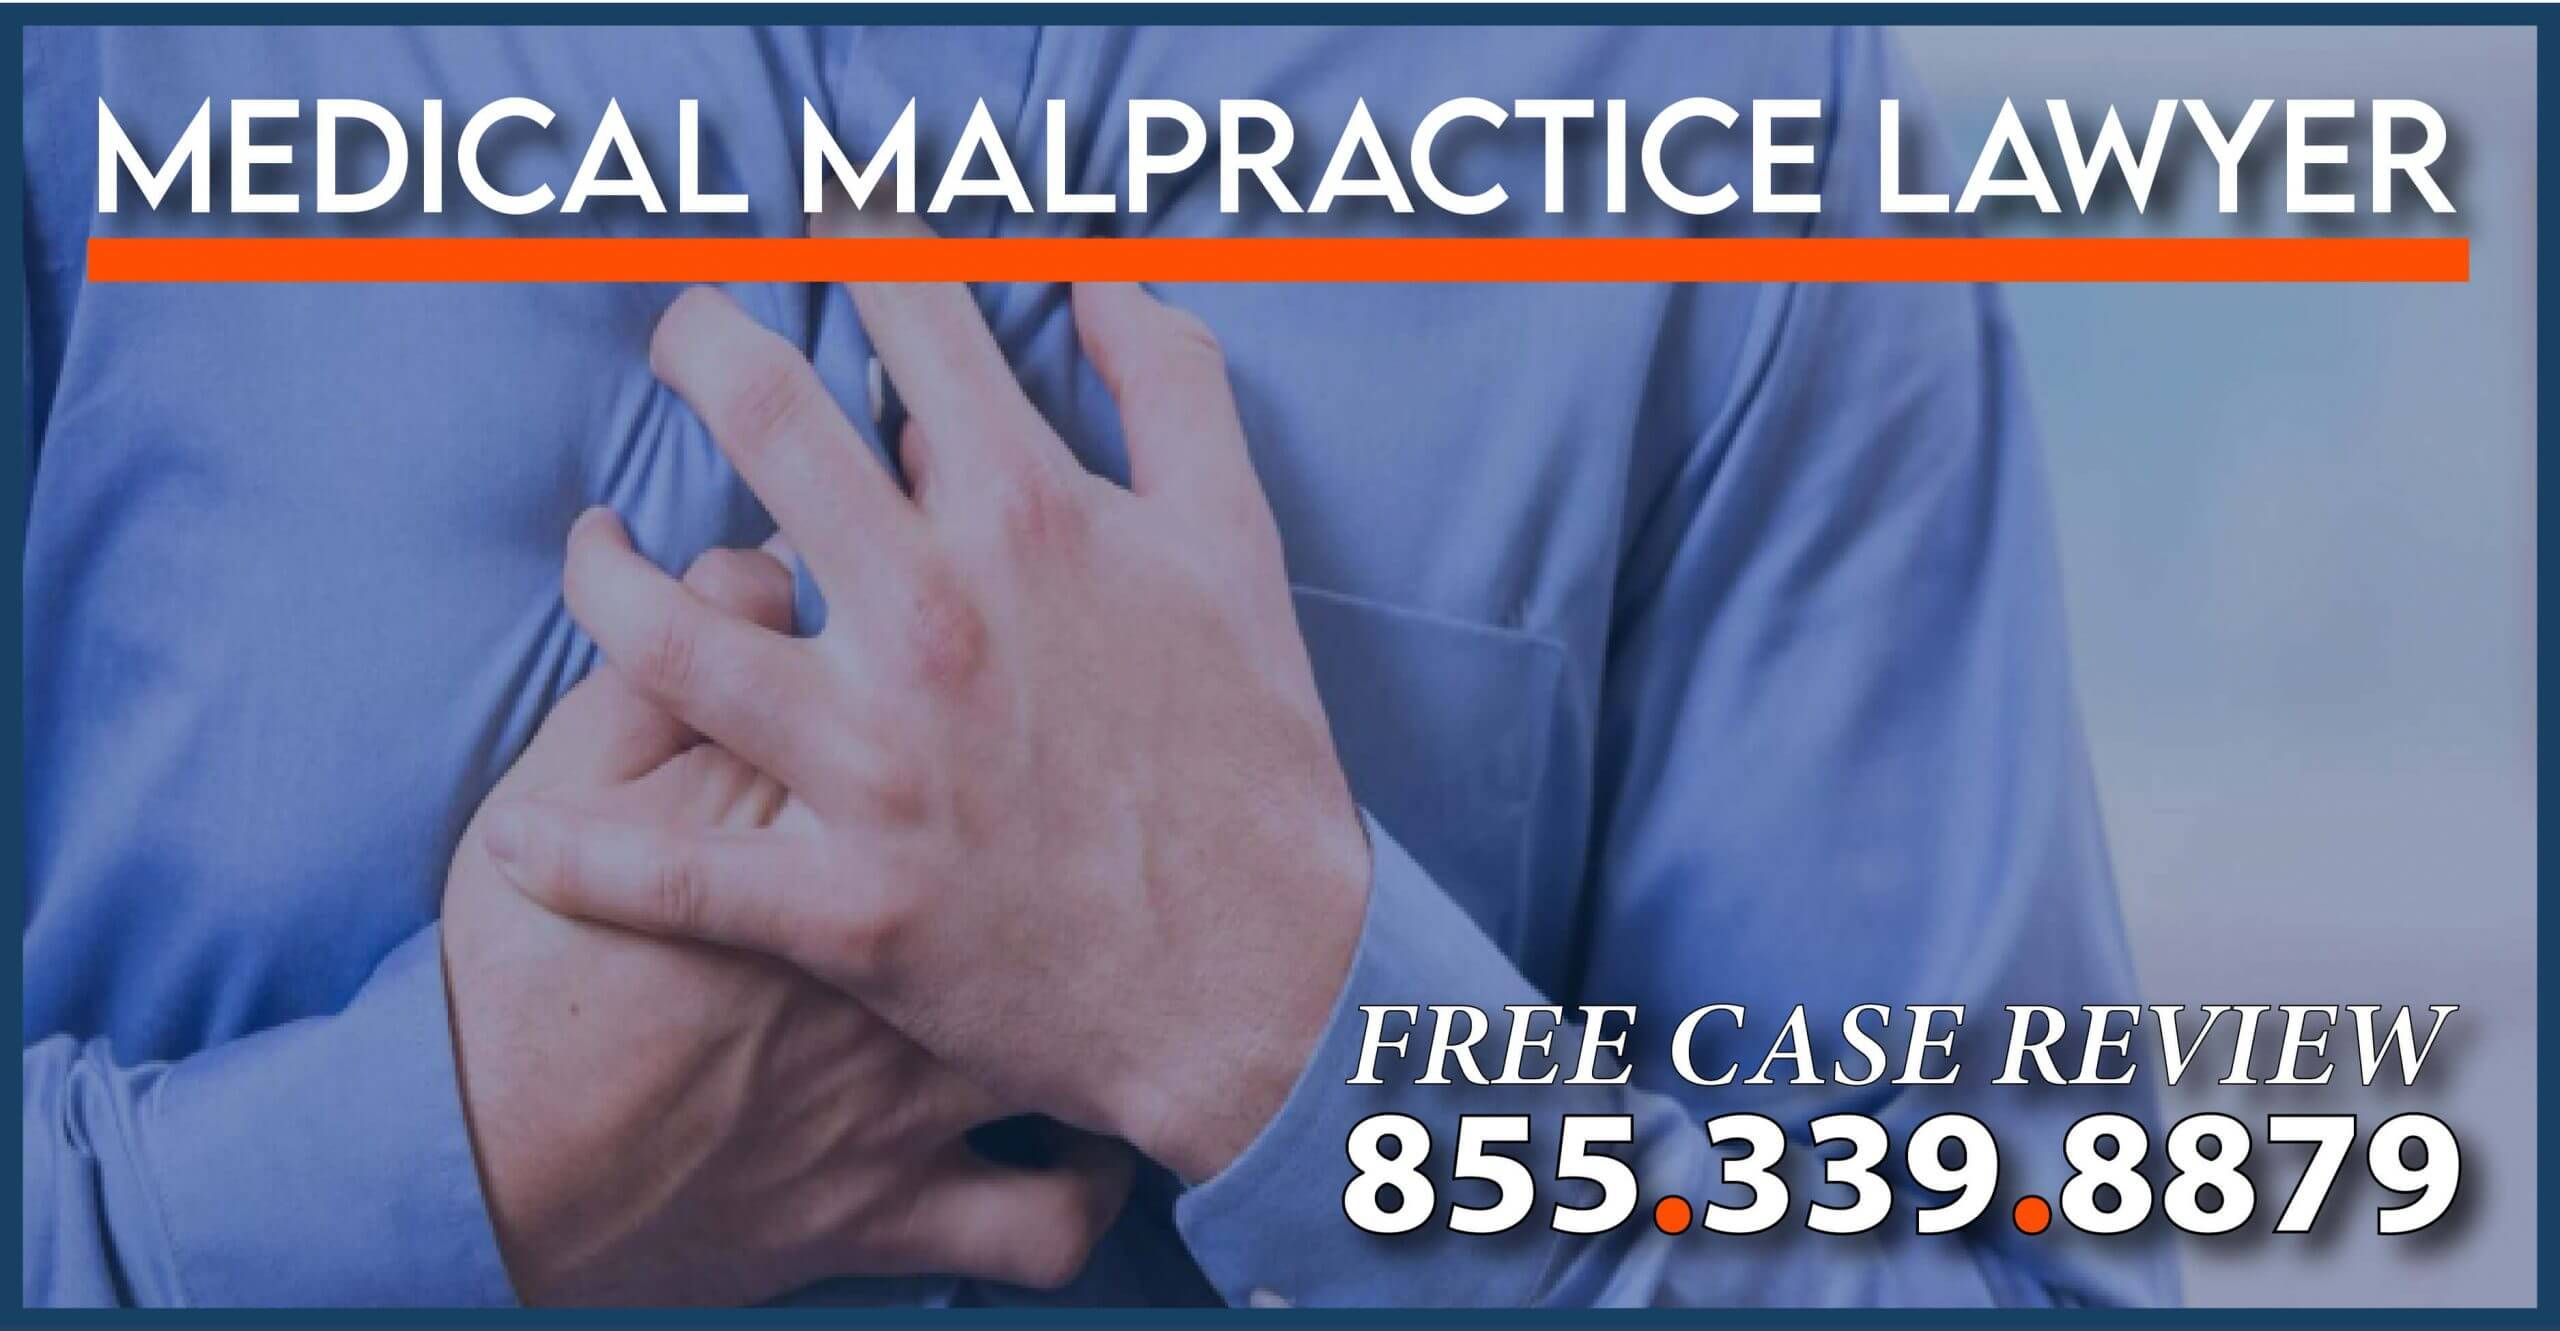 heart attack misdiagnosis medical malpractice lawyer compensation lawsuit attorney